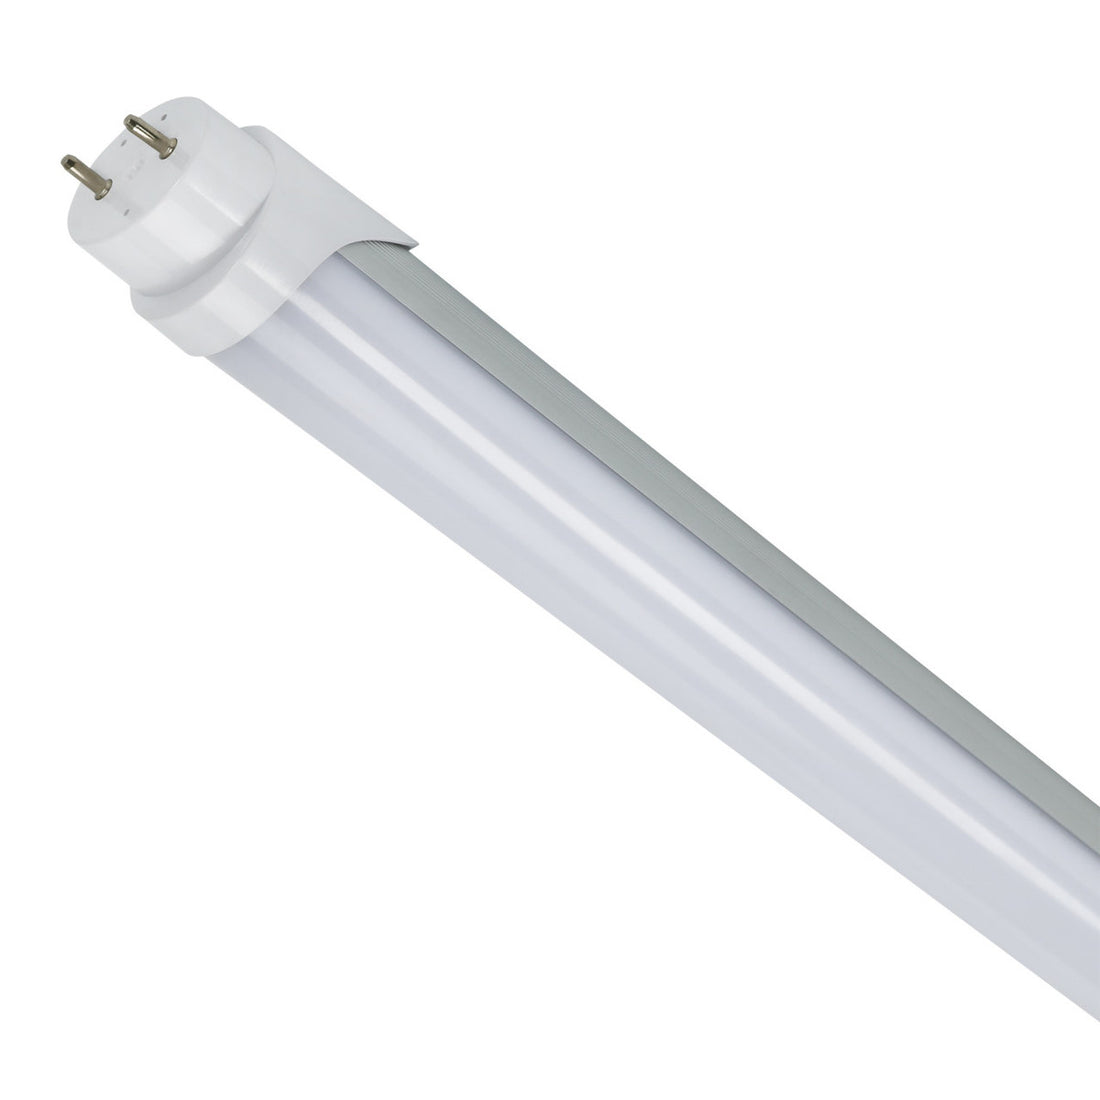 Wattage-Tunable 4ft LED Tube - 15W/12W/10W, 5000K, 100-277VAC Input, Switch Dimming, 140¬∞ Beam Angle, Frosted Lens, Circular Aluminum Housing, Two-End Input - 42 Pack